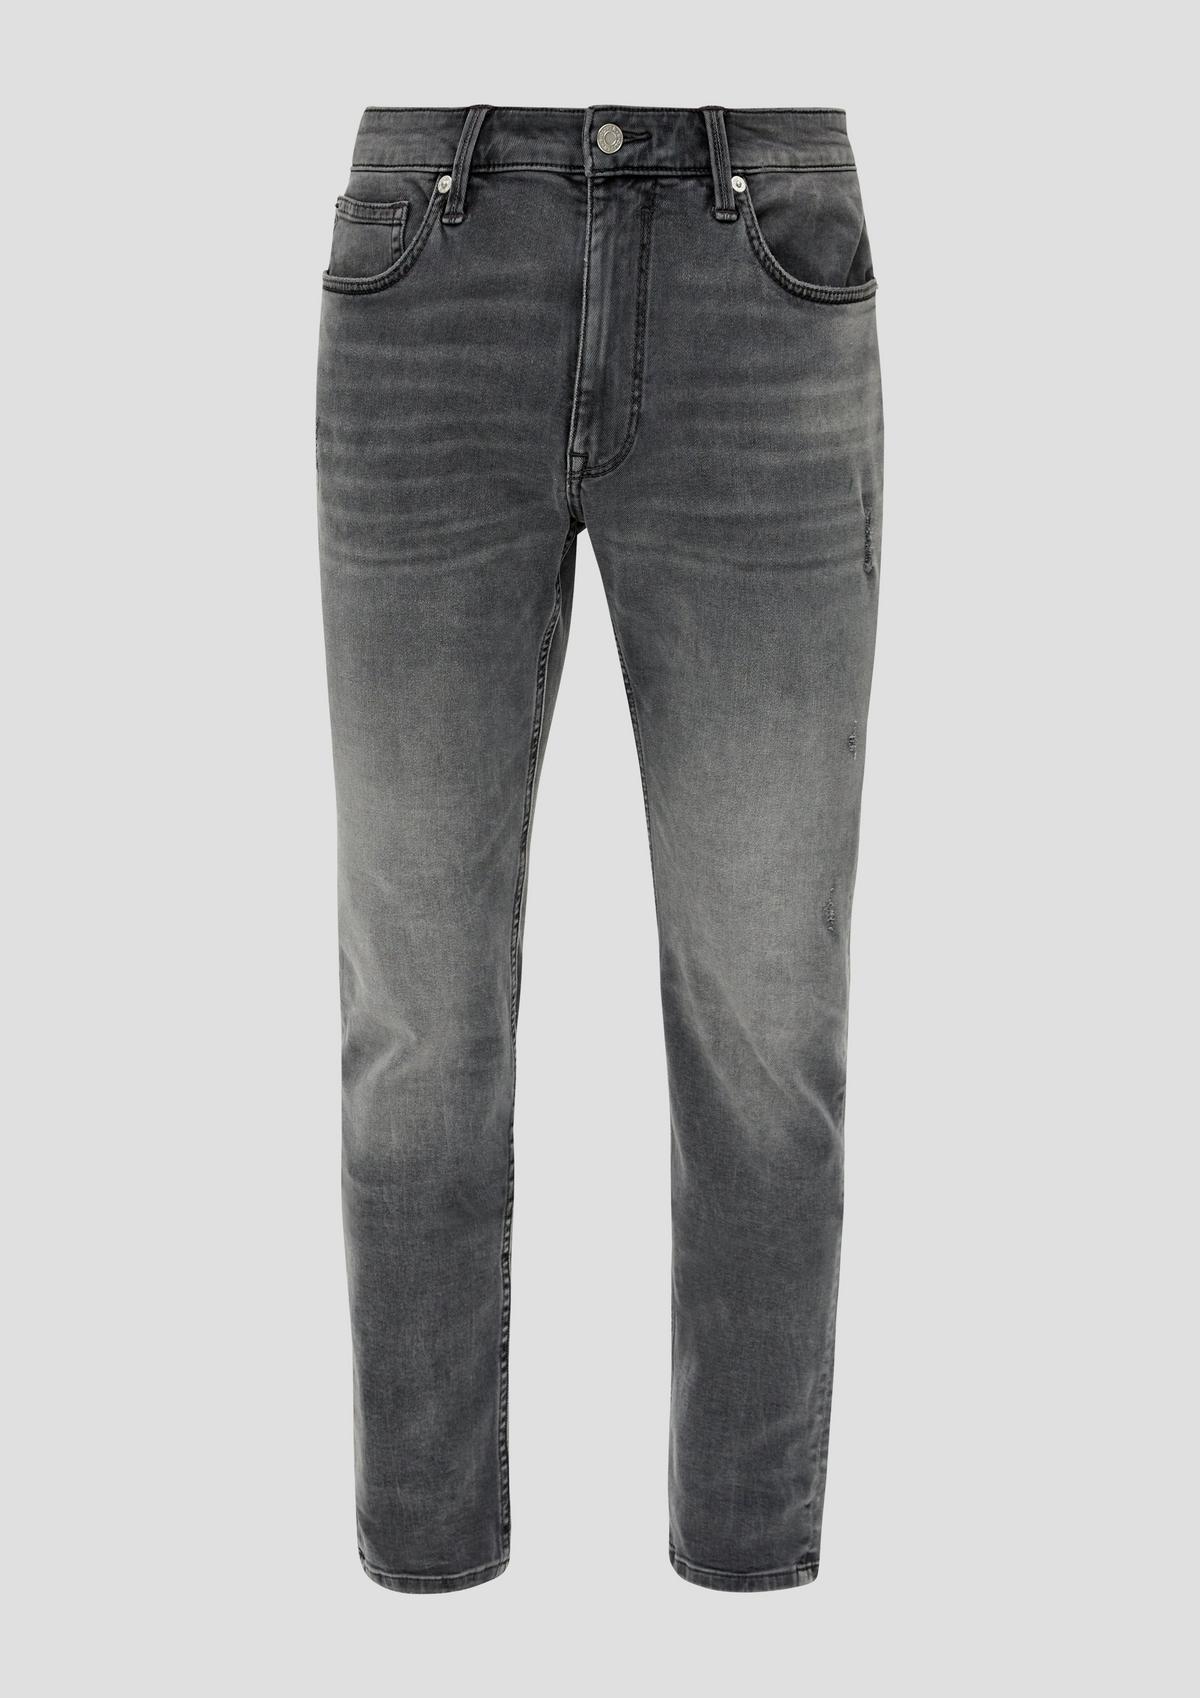 s.Oliver Jeans Keith / Slim Fit /  Mid Rise / Straight Leg